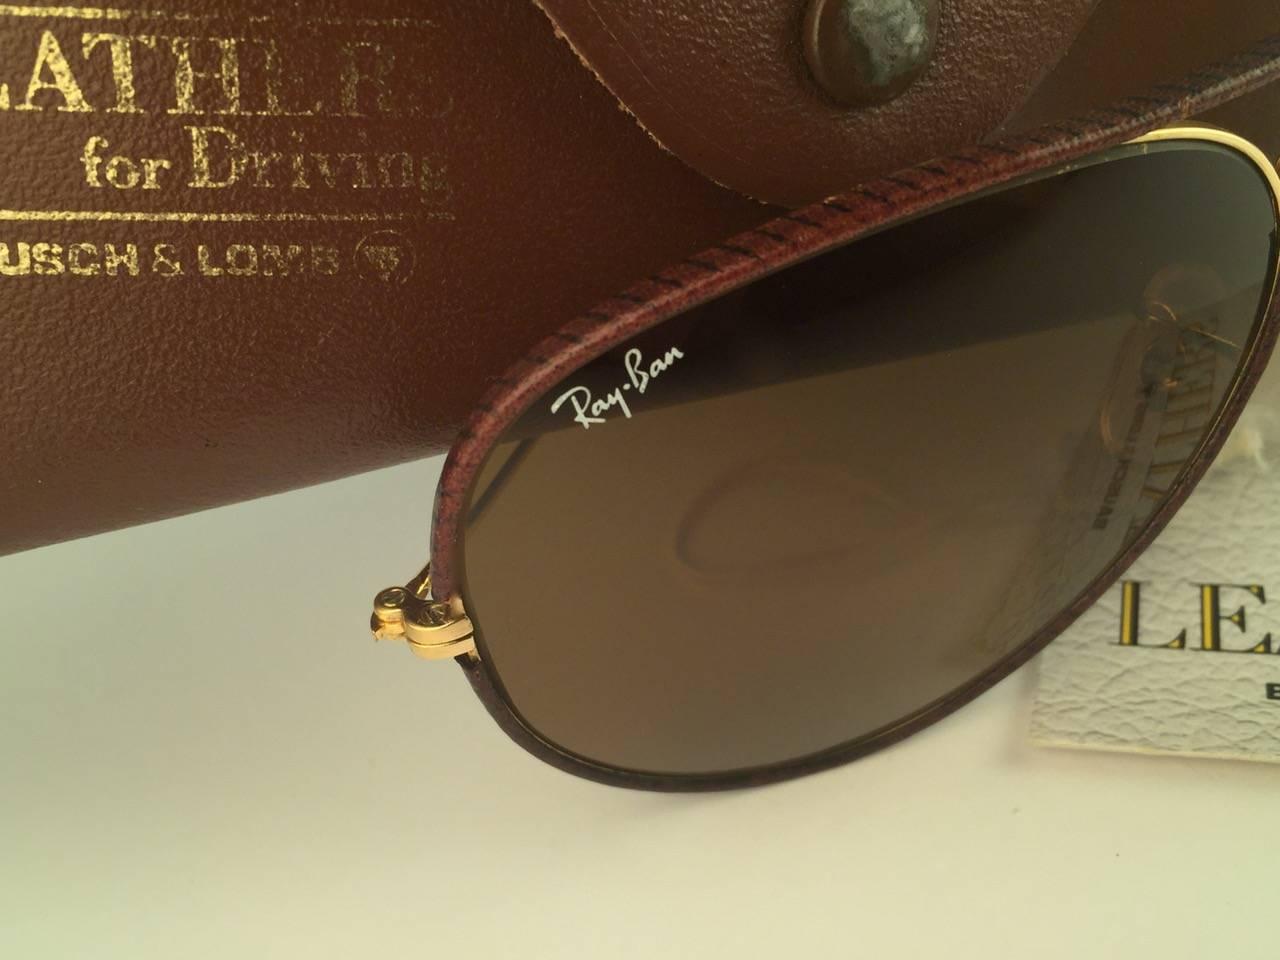 New Vintage Ray Ban Leathers Aviator 62mm in tobacco brown leather with gold metal combination frame sporting B15 brown lenses with white Ray Ban logo. 

B&L etched in the lenses, so mid 1970's. 

Comes with its original Ray Ban B&L case with minor